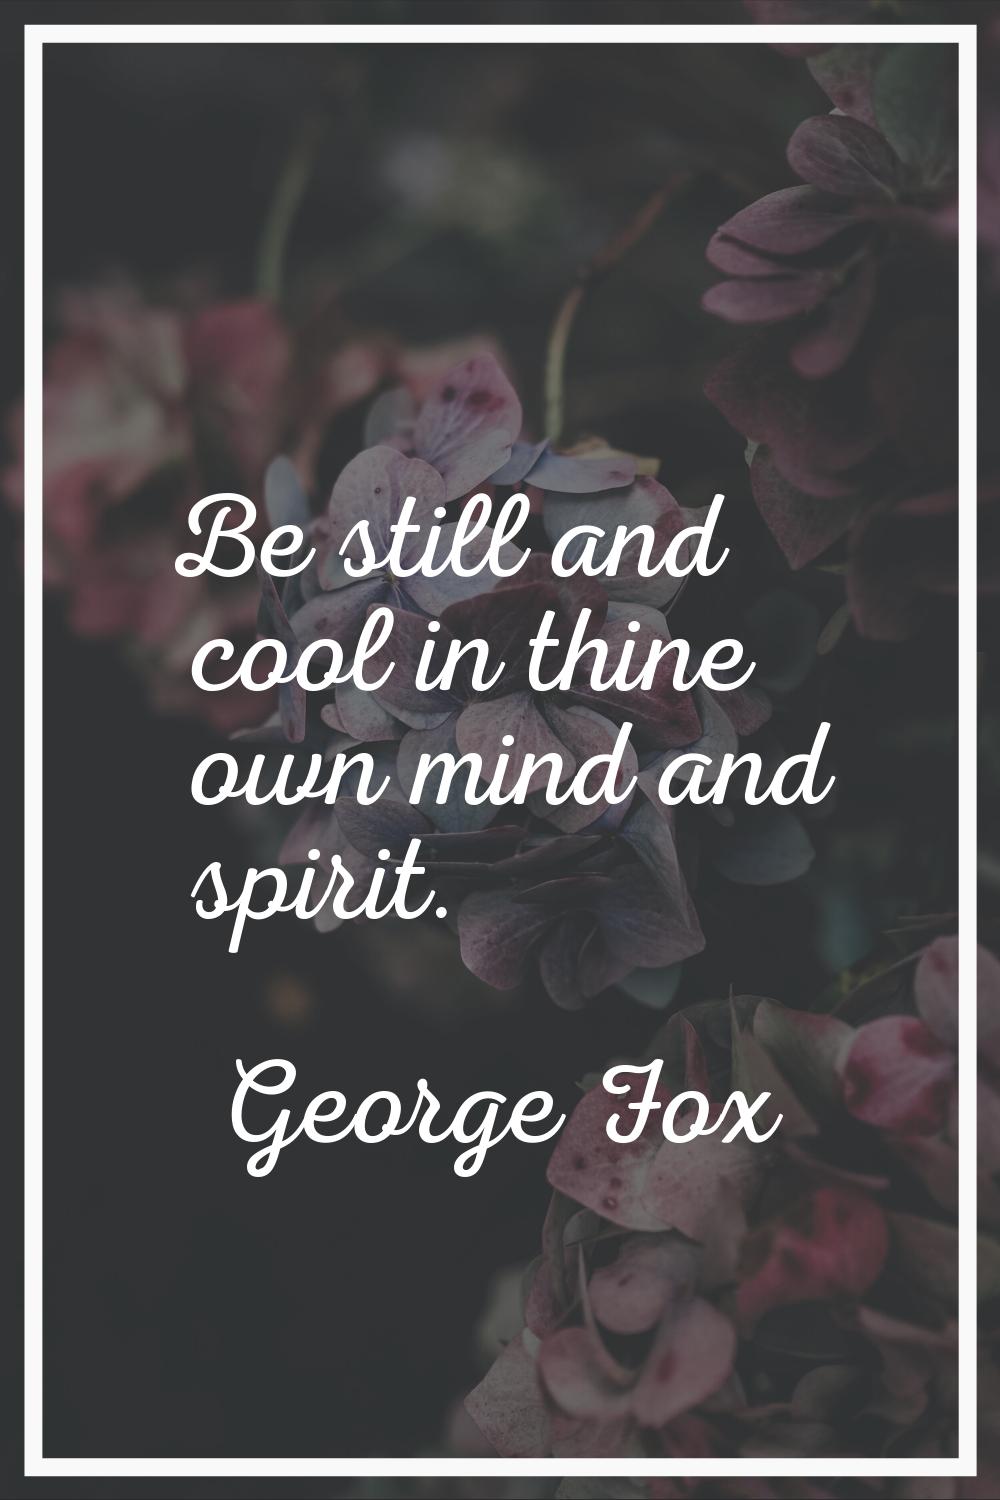 Be still and cool in thine own mind and spirit.